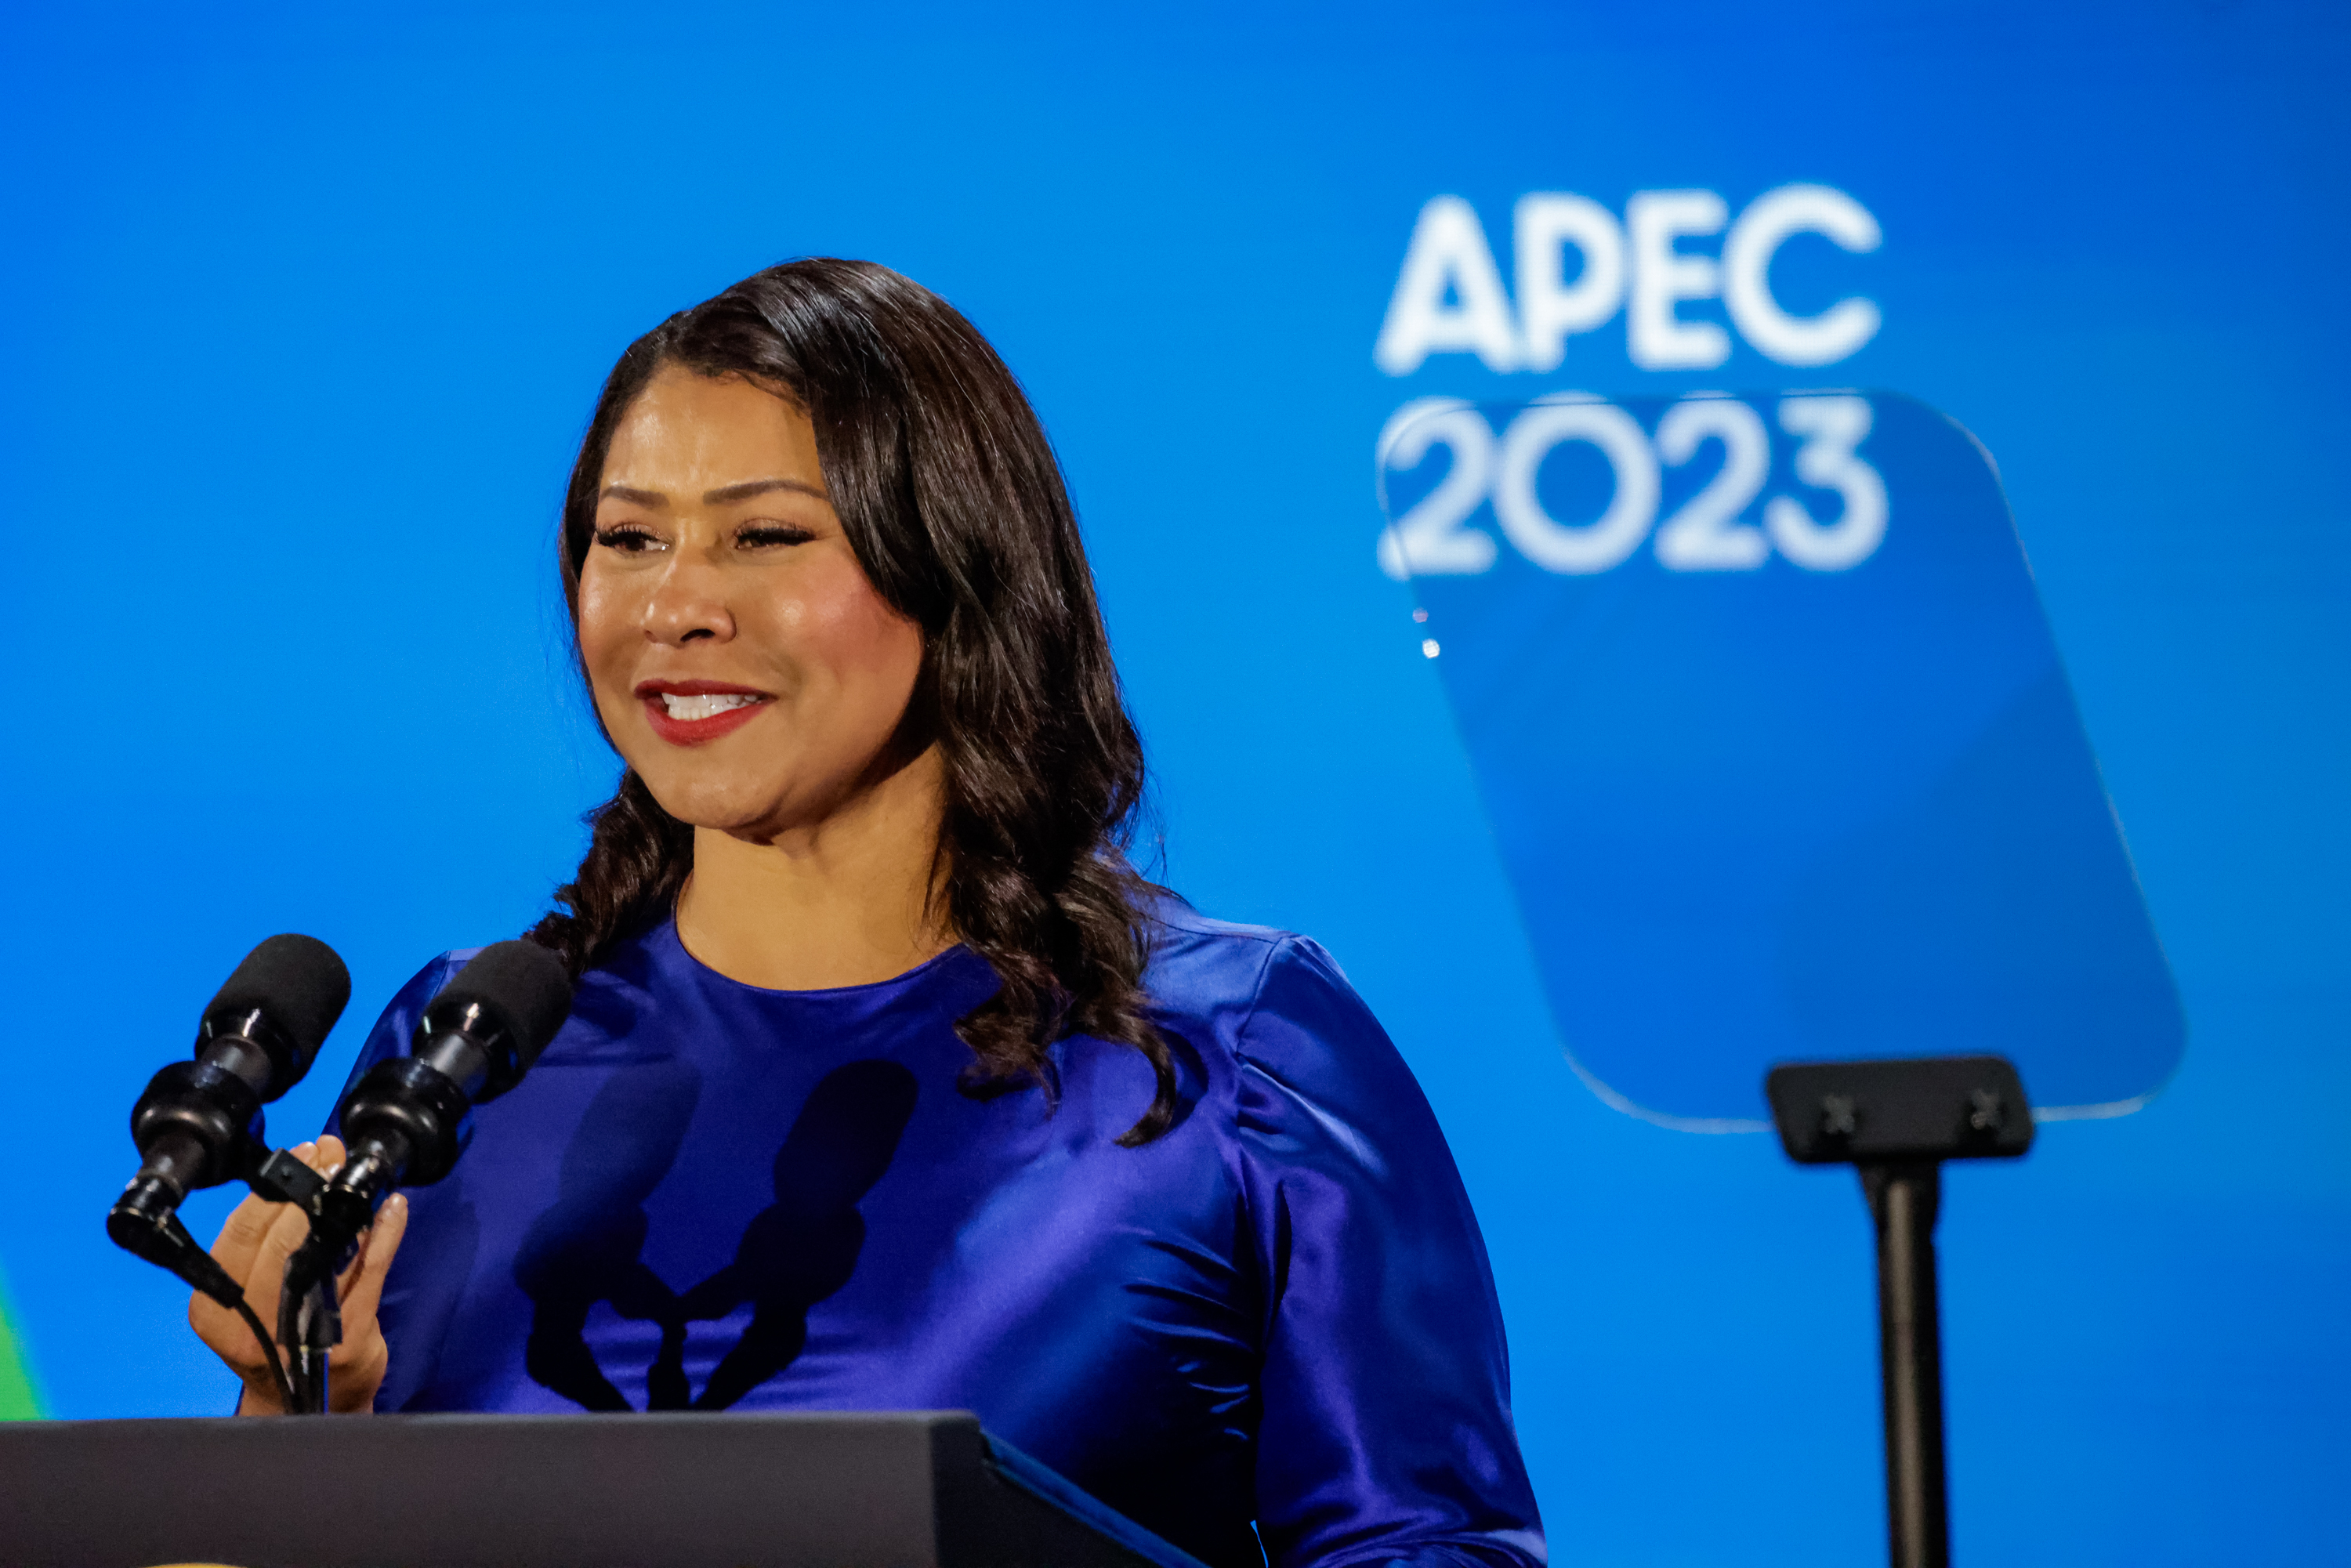 A woman is speaking at a podium with "APEC 2023" in the background.